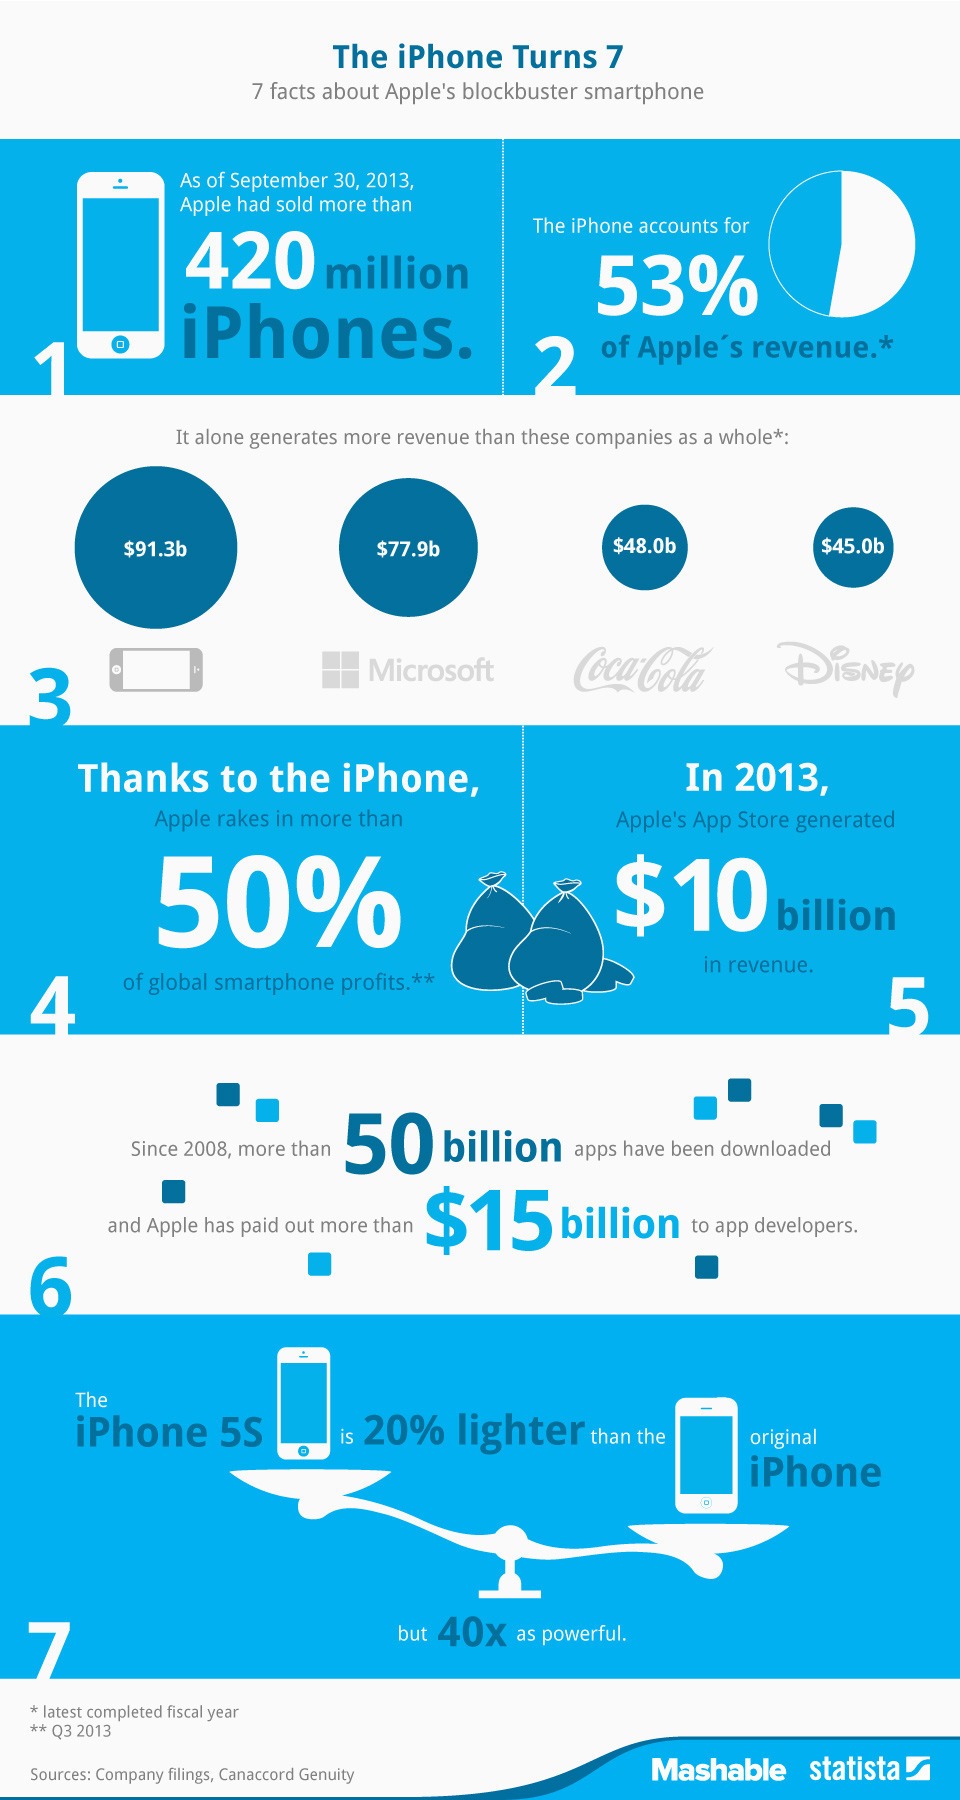 7 facts_iPhone_01